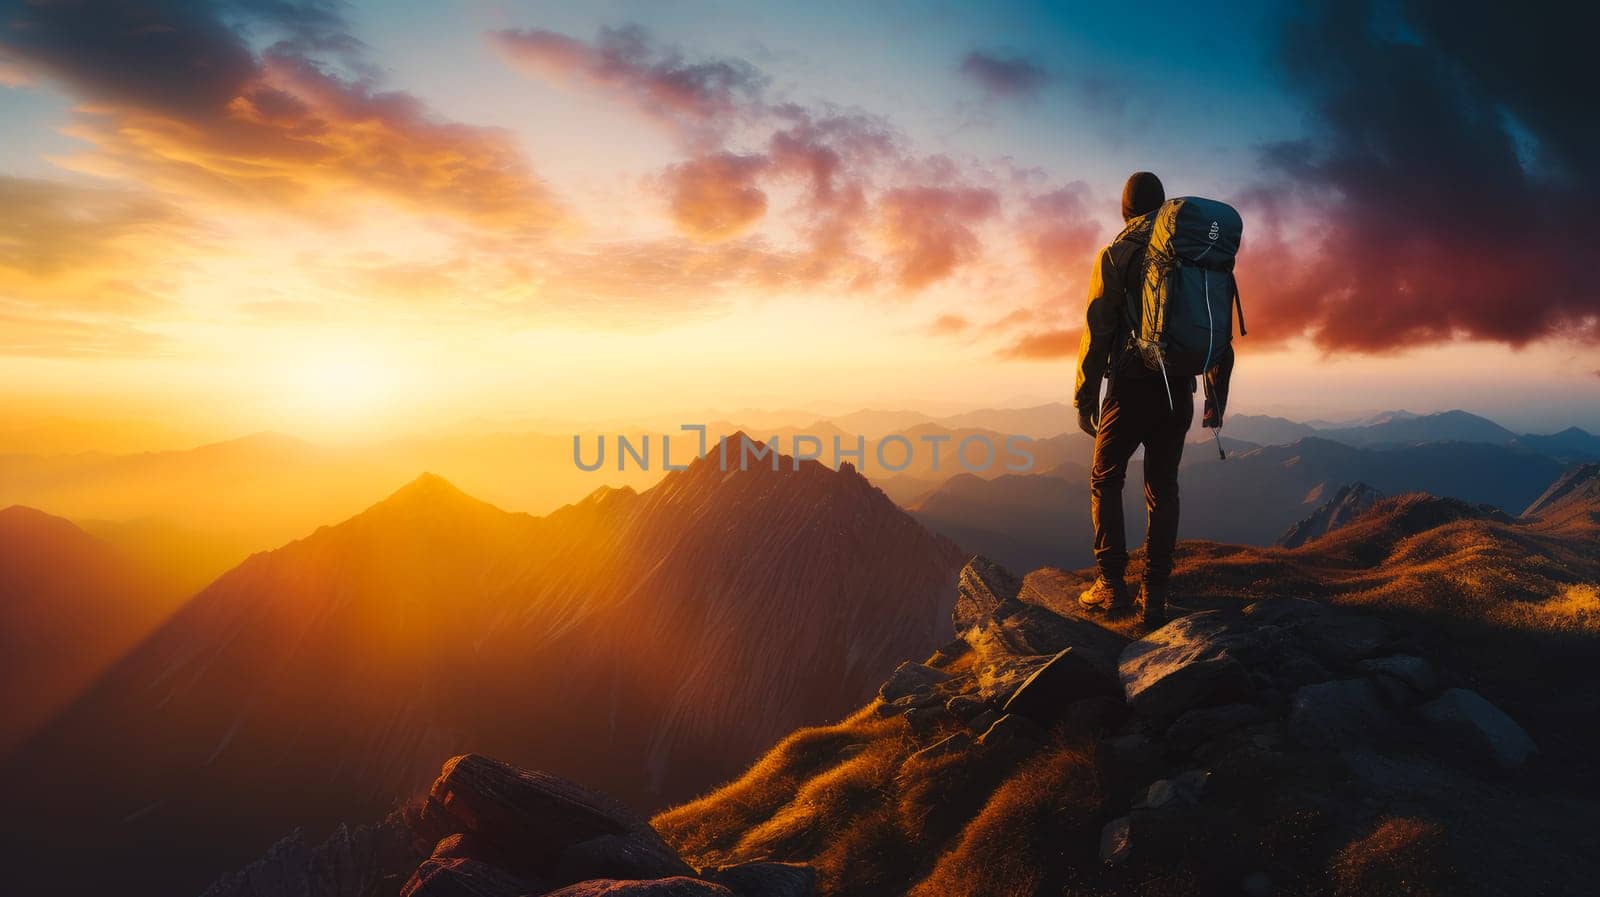 A man high in the mountains enjoys a beautiful view, landscape. Beautiful landscape, picture, phone screensaver, copy space, advertising, travel agency, tourism, solitude with nature